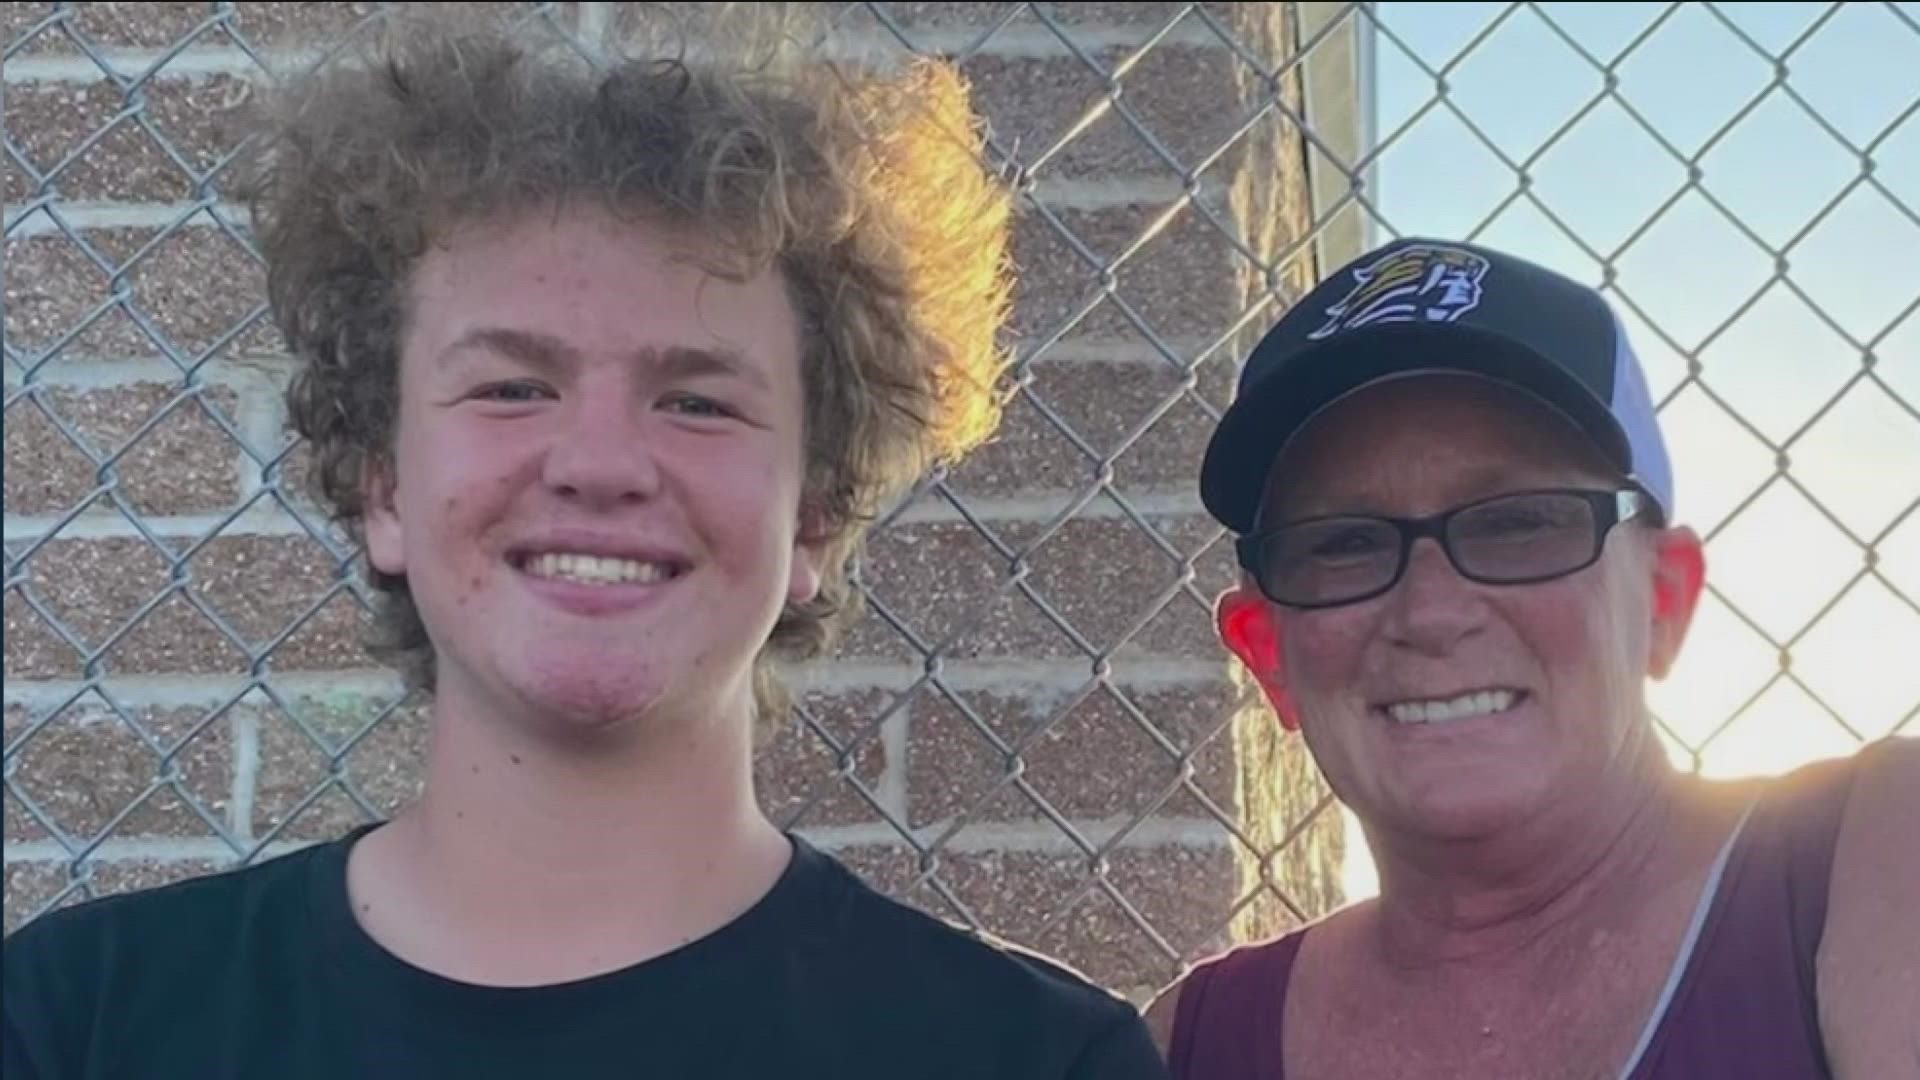 Kelly Miller shared an emotional video describing what a young KHS football player did for her. She wanted to track him down. The video went viral on social media.